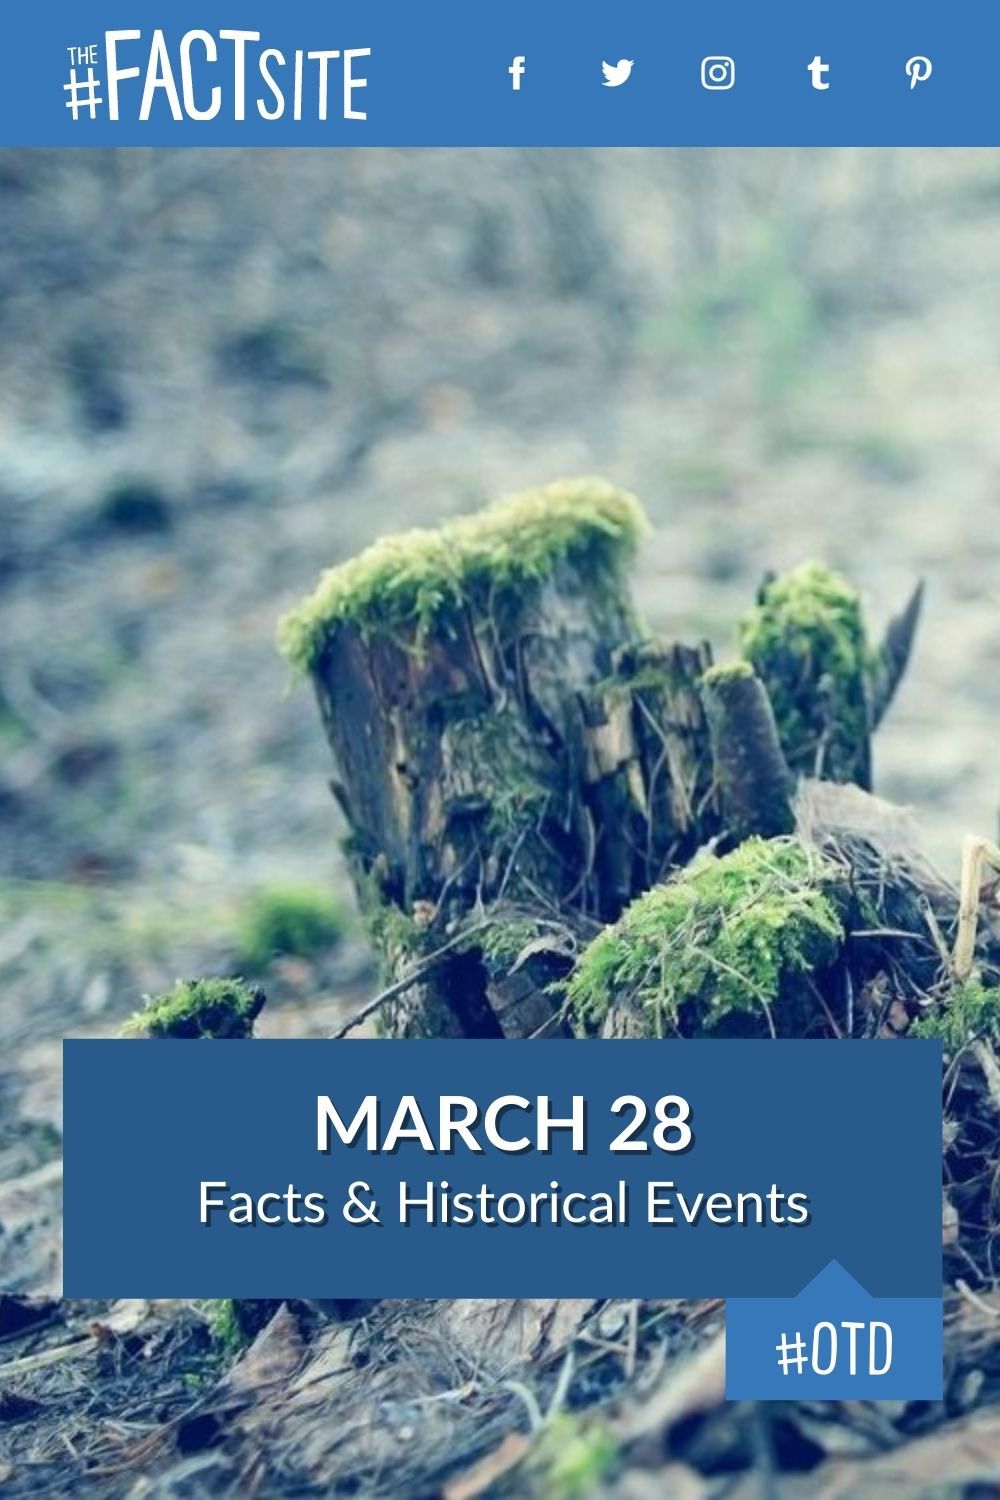 March 28: Facts & Historical Events On This Day